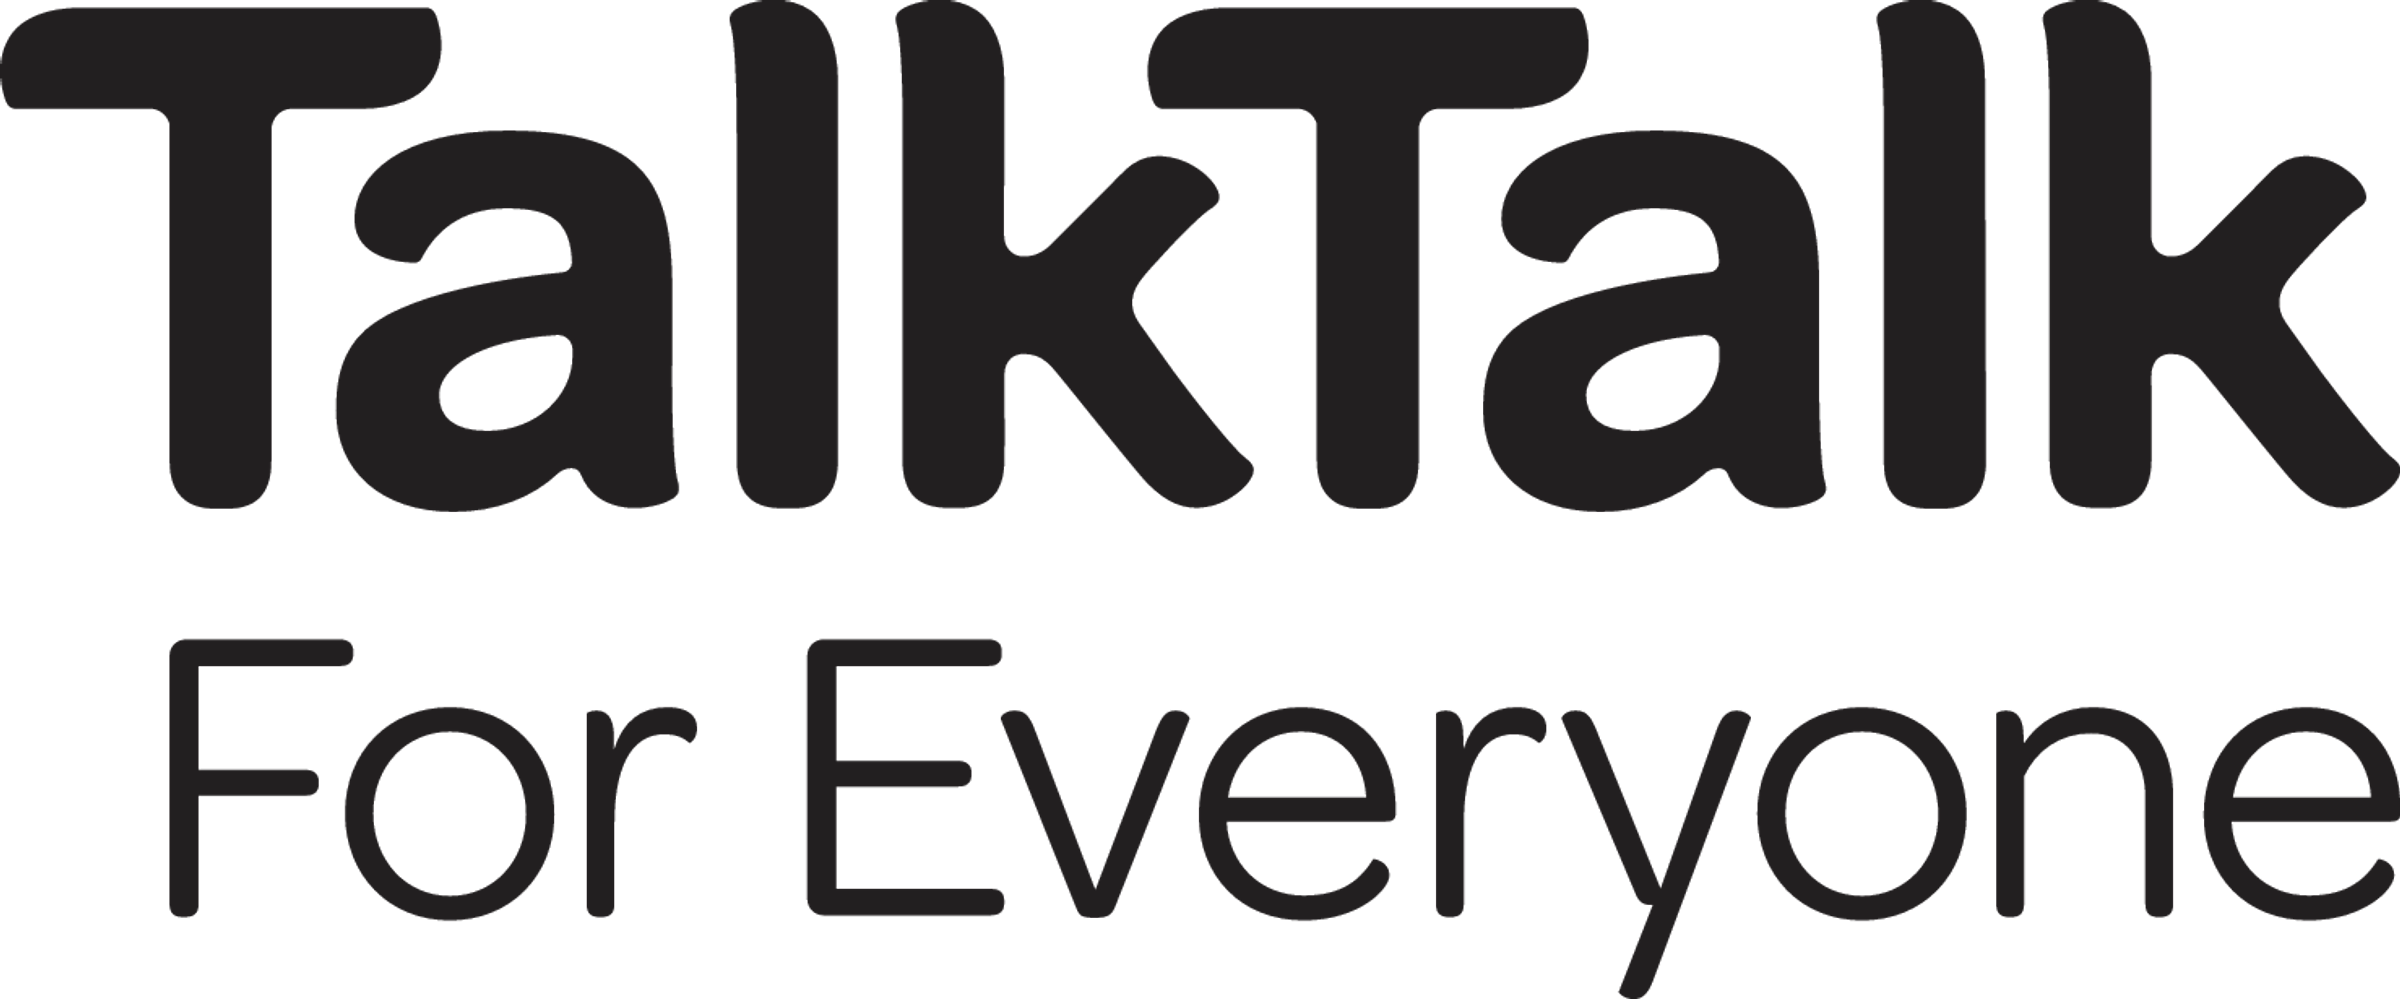 Compare Our Best Black Friday Talktalk Broadband Deals Packages 2020 Uswitch Com